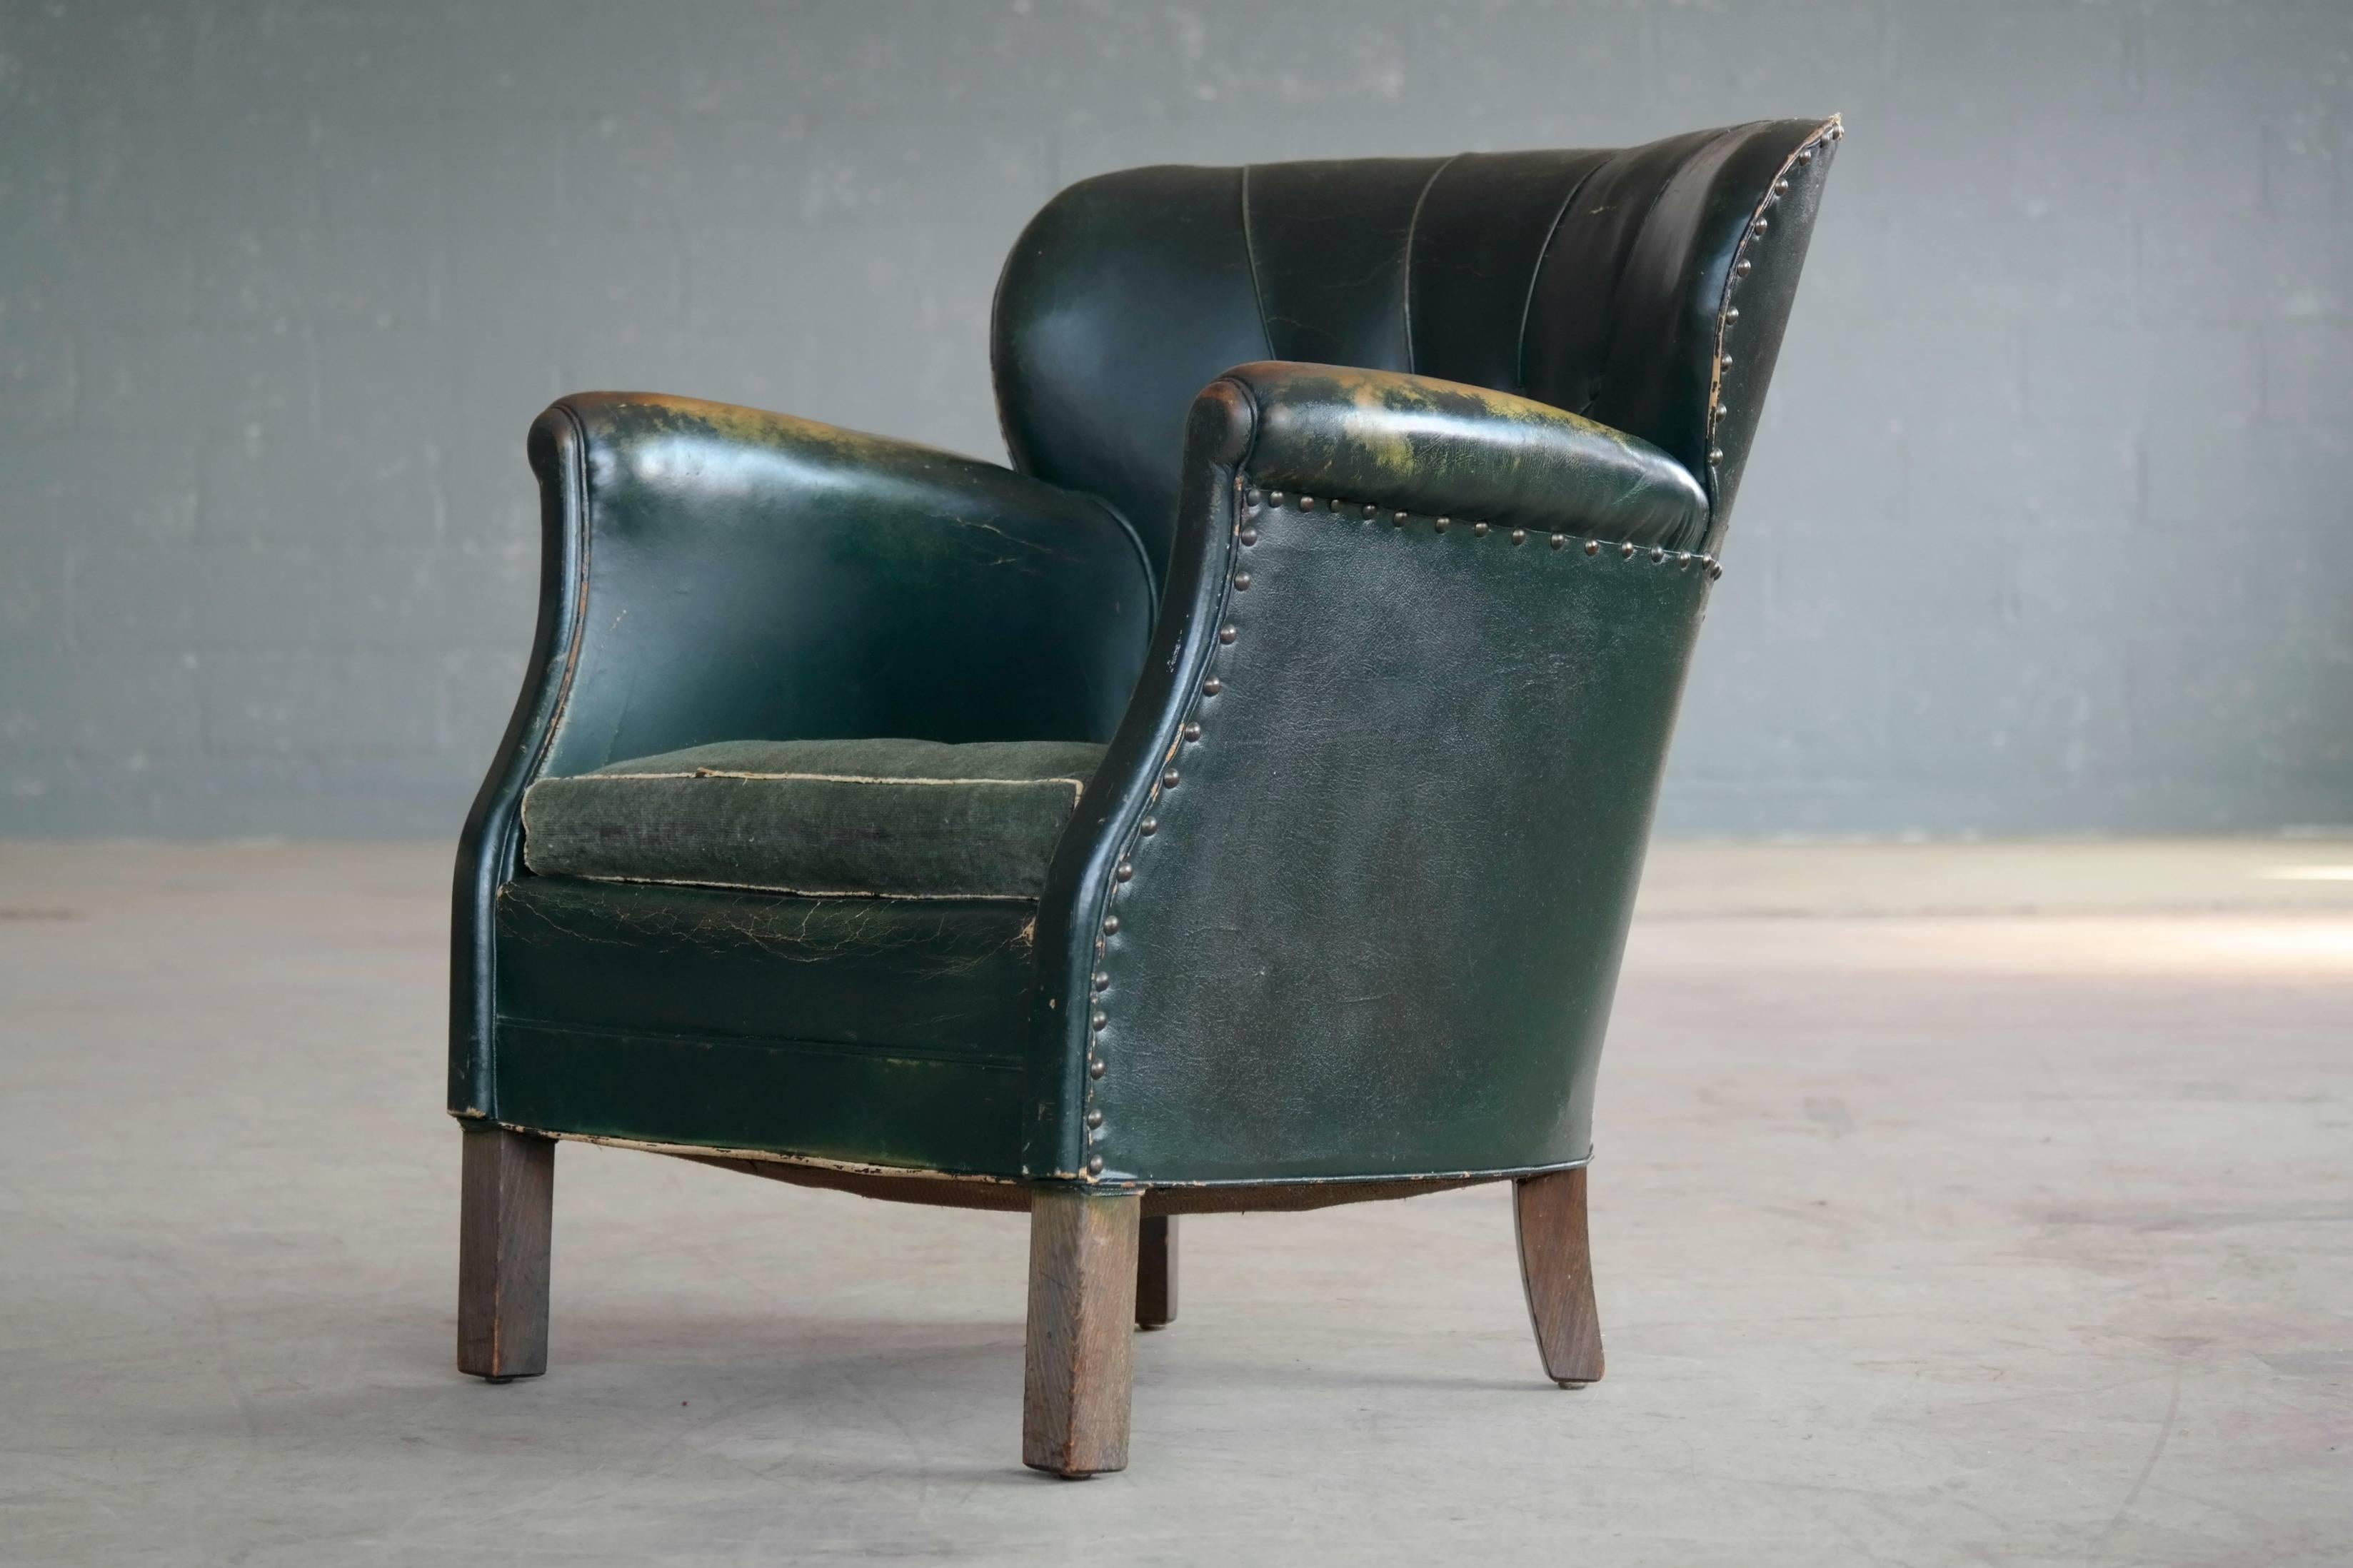 Danish 1930s Small Scale Club Chair in Tufted Patinated Green Leather 1